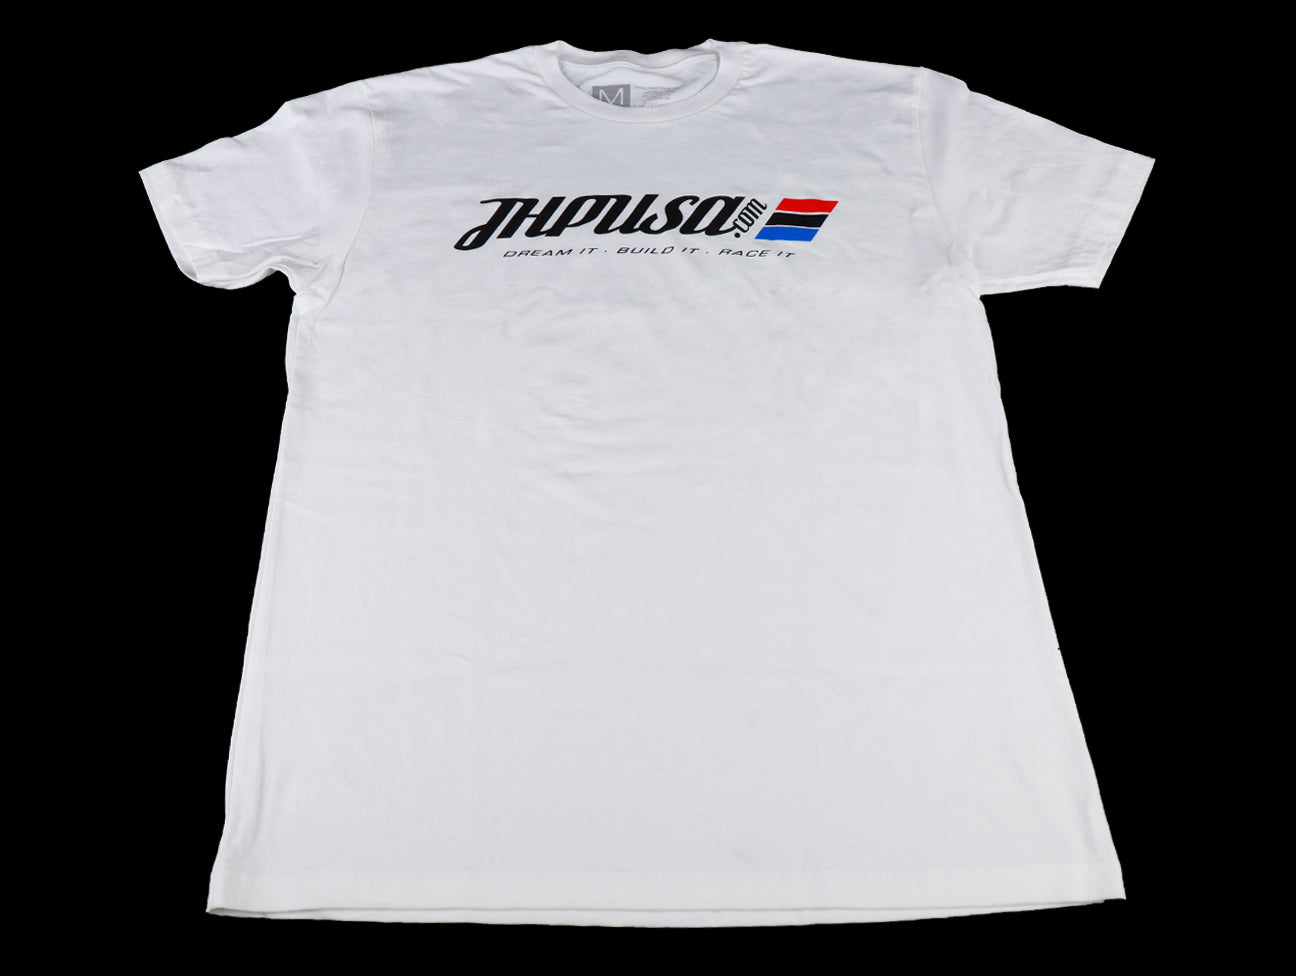 Rays Concept Is Racing T-Shirt - JHPUSA Small